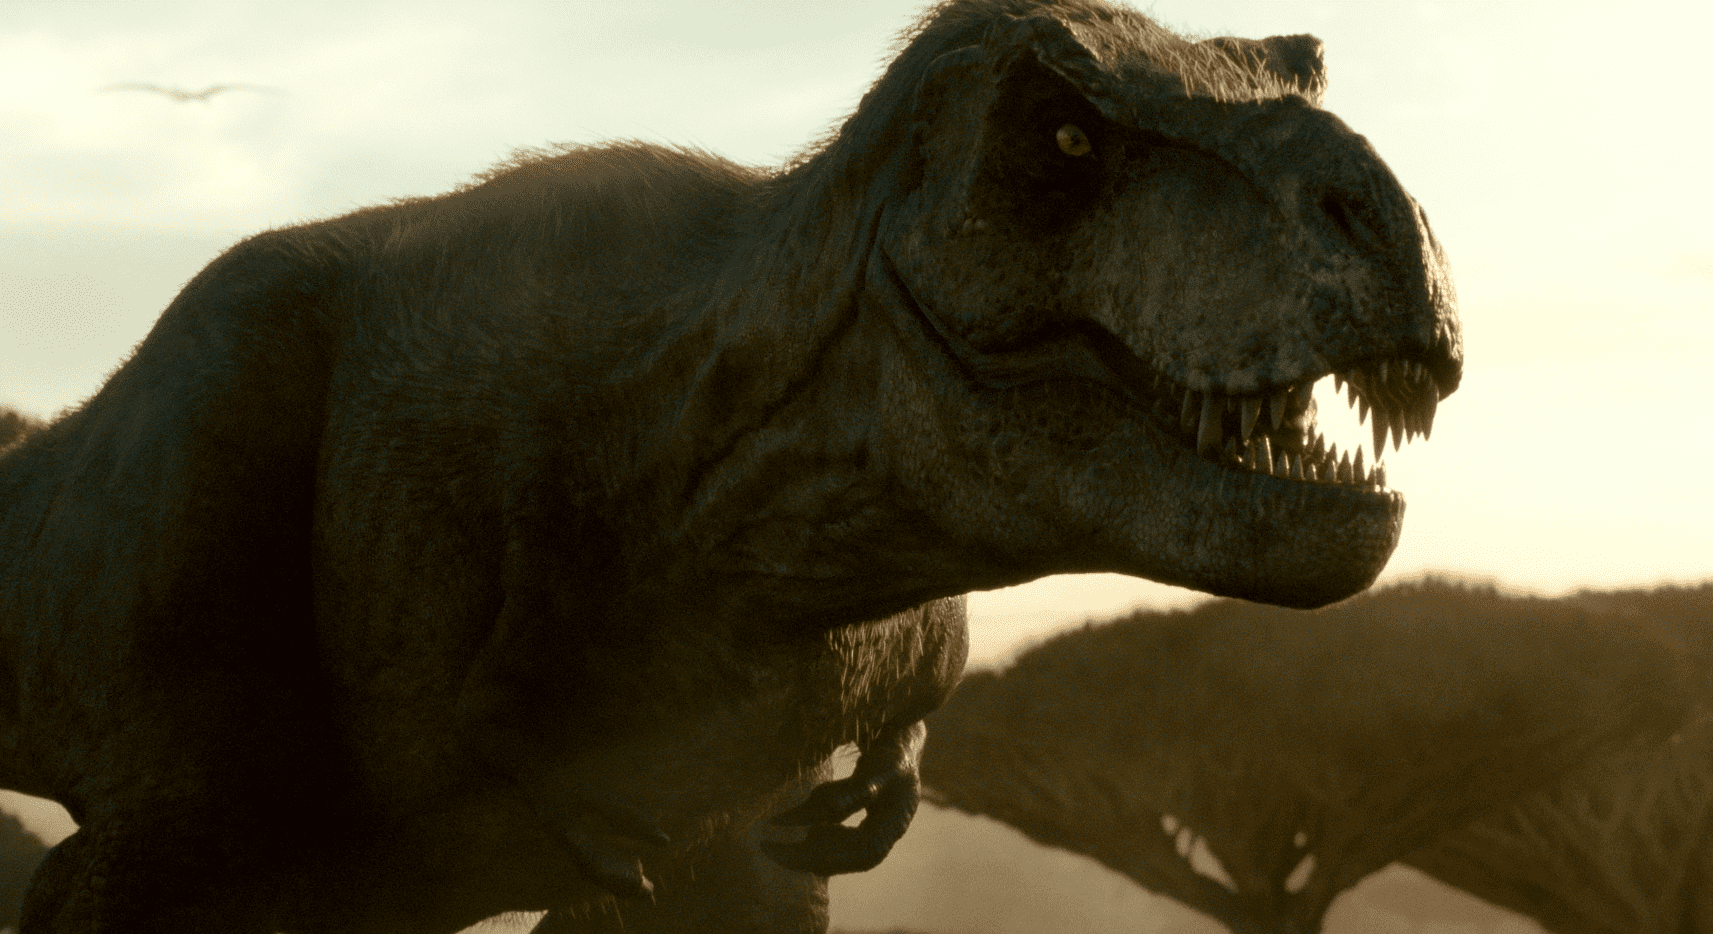 Raw HD Gallery of the Prehistoric 'Jurassic World Dominion' Prologue